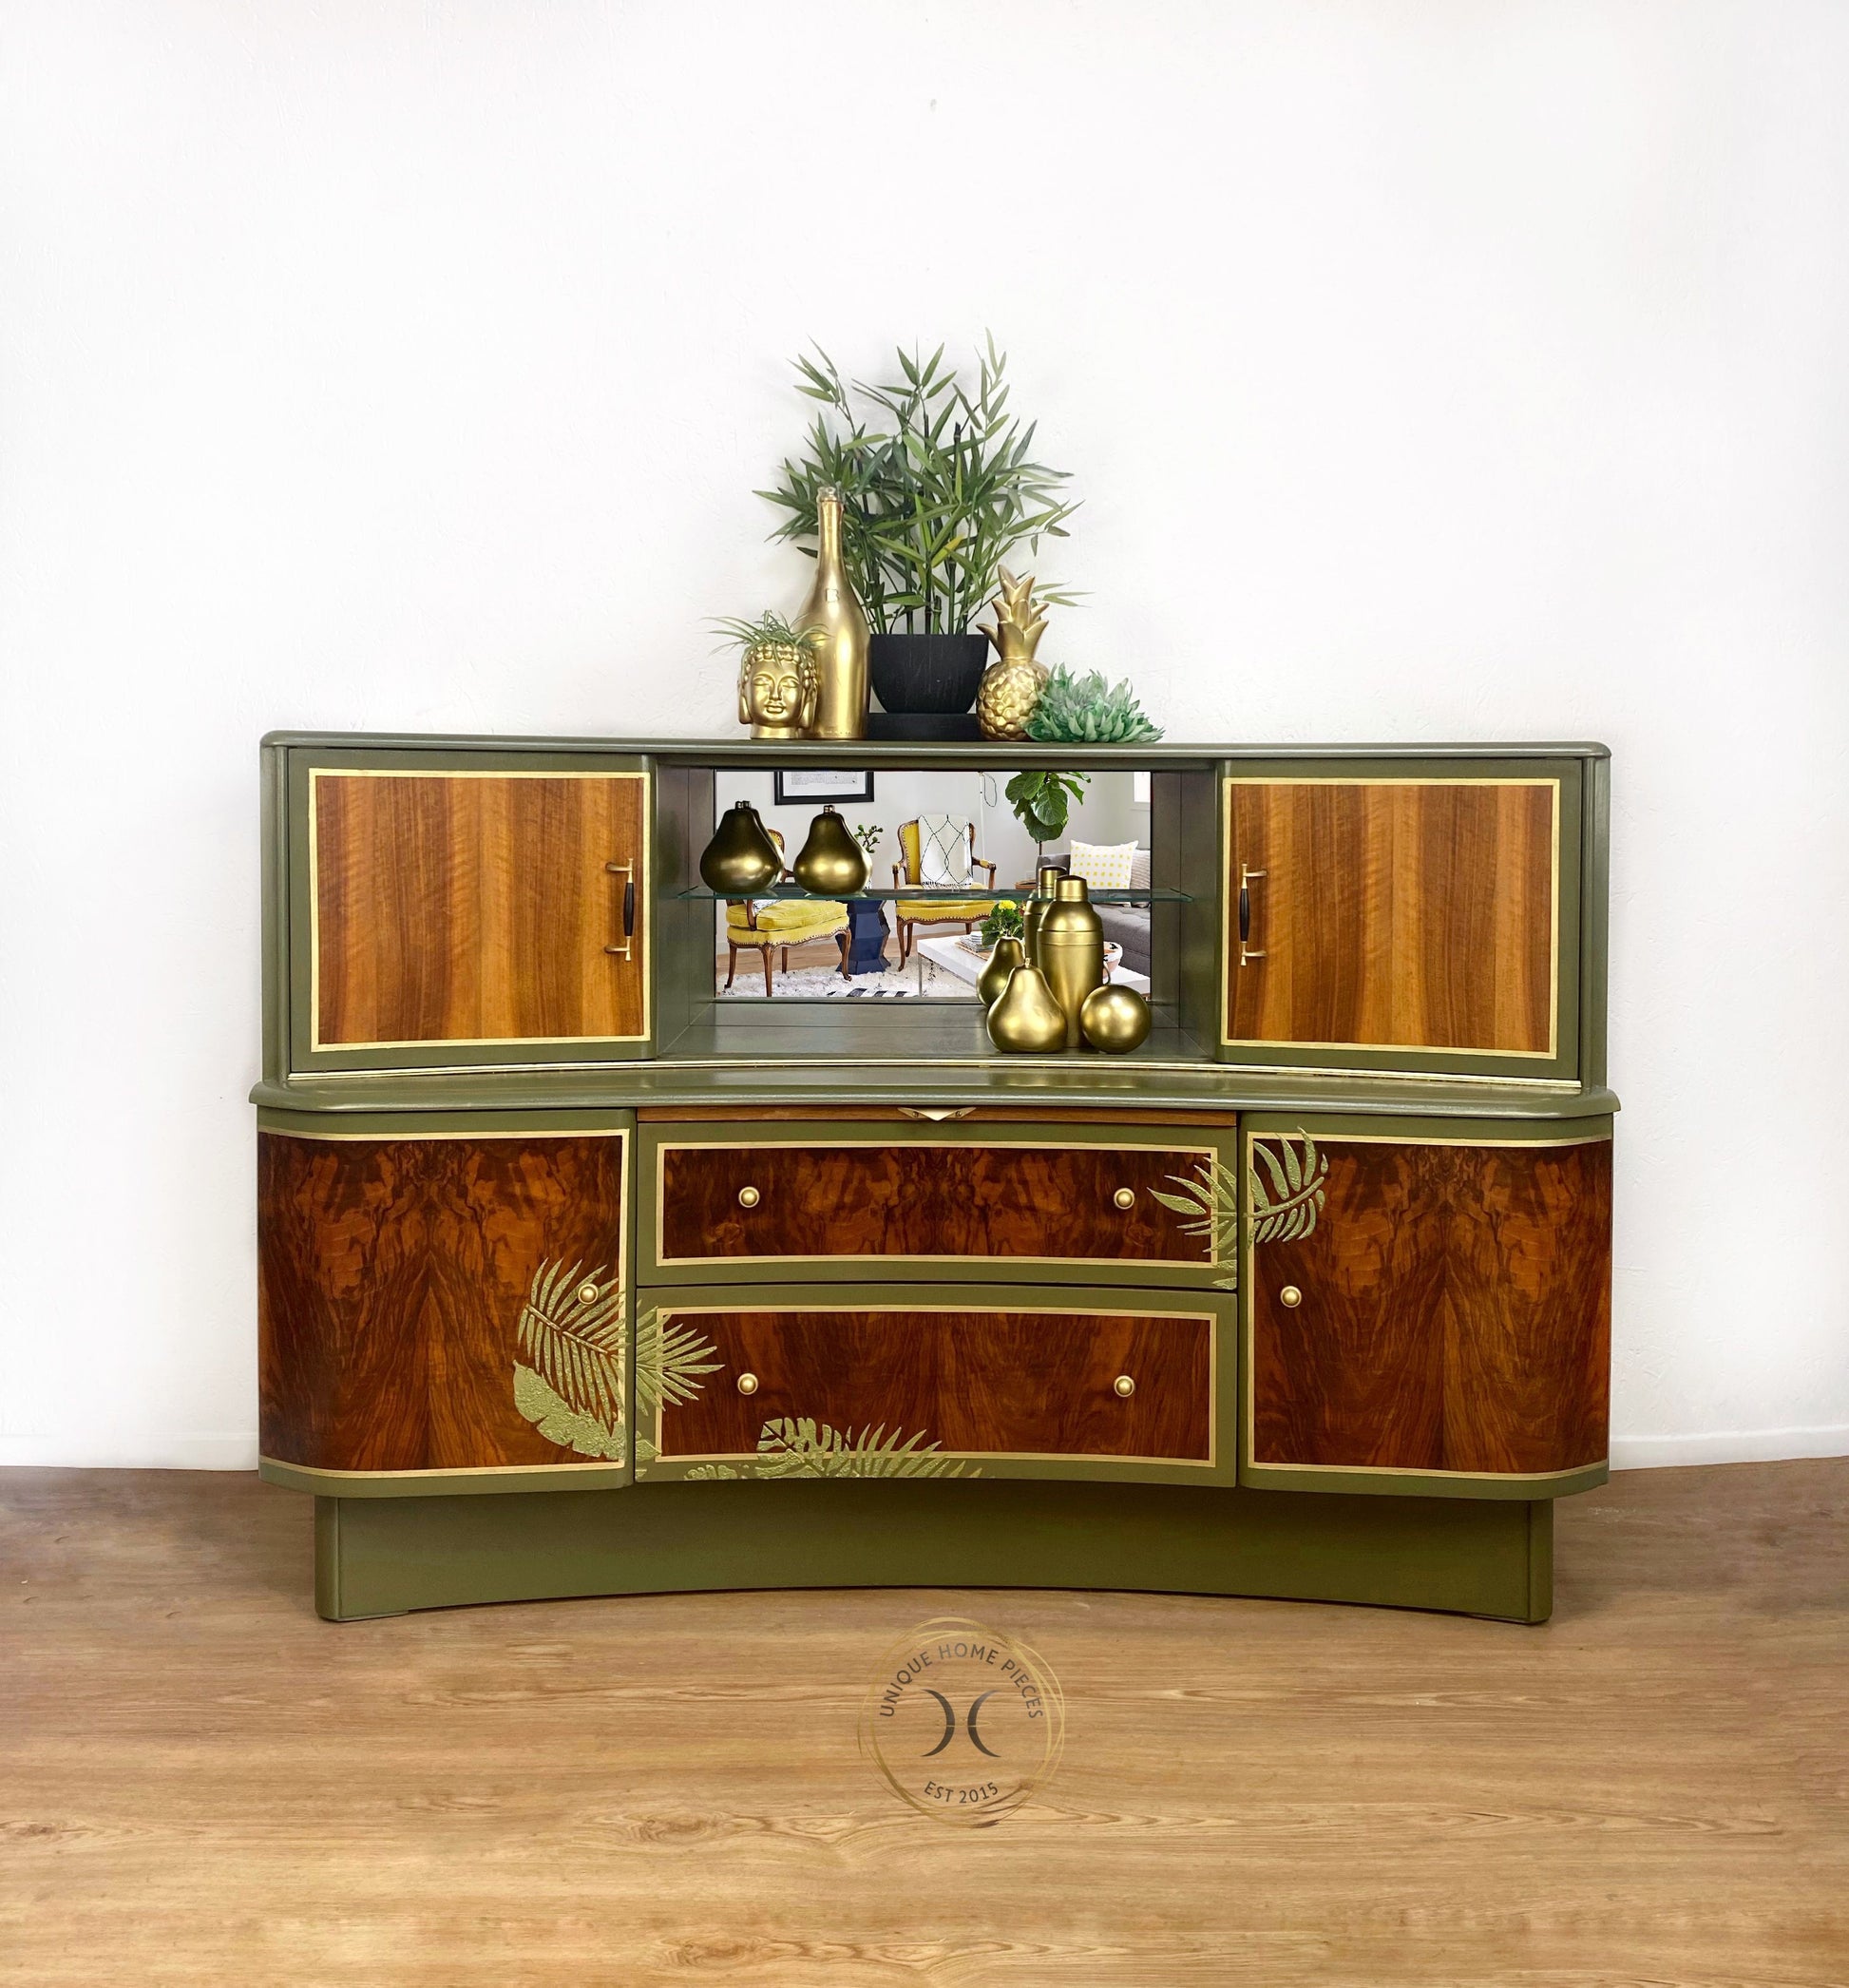 consists for 4 cupboards  each sitting on the outsides with 2 central drawers at the bottom  with a pull out shelf to make your drinks on an open mirror backed display area with a glass shelf.  Teak and walnut wood  with olive green painted fern leaf design internally and externally gold stripes and hardware. varnished to seal.  H eight 92 cm Depth 50 cm Width 138  cm £2495